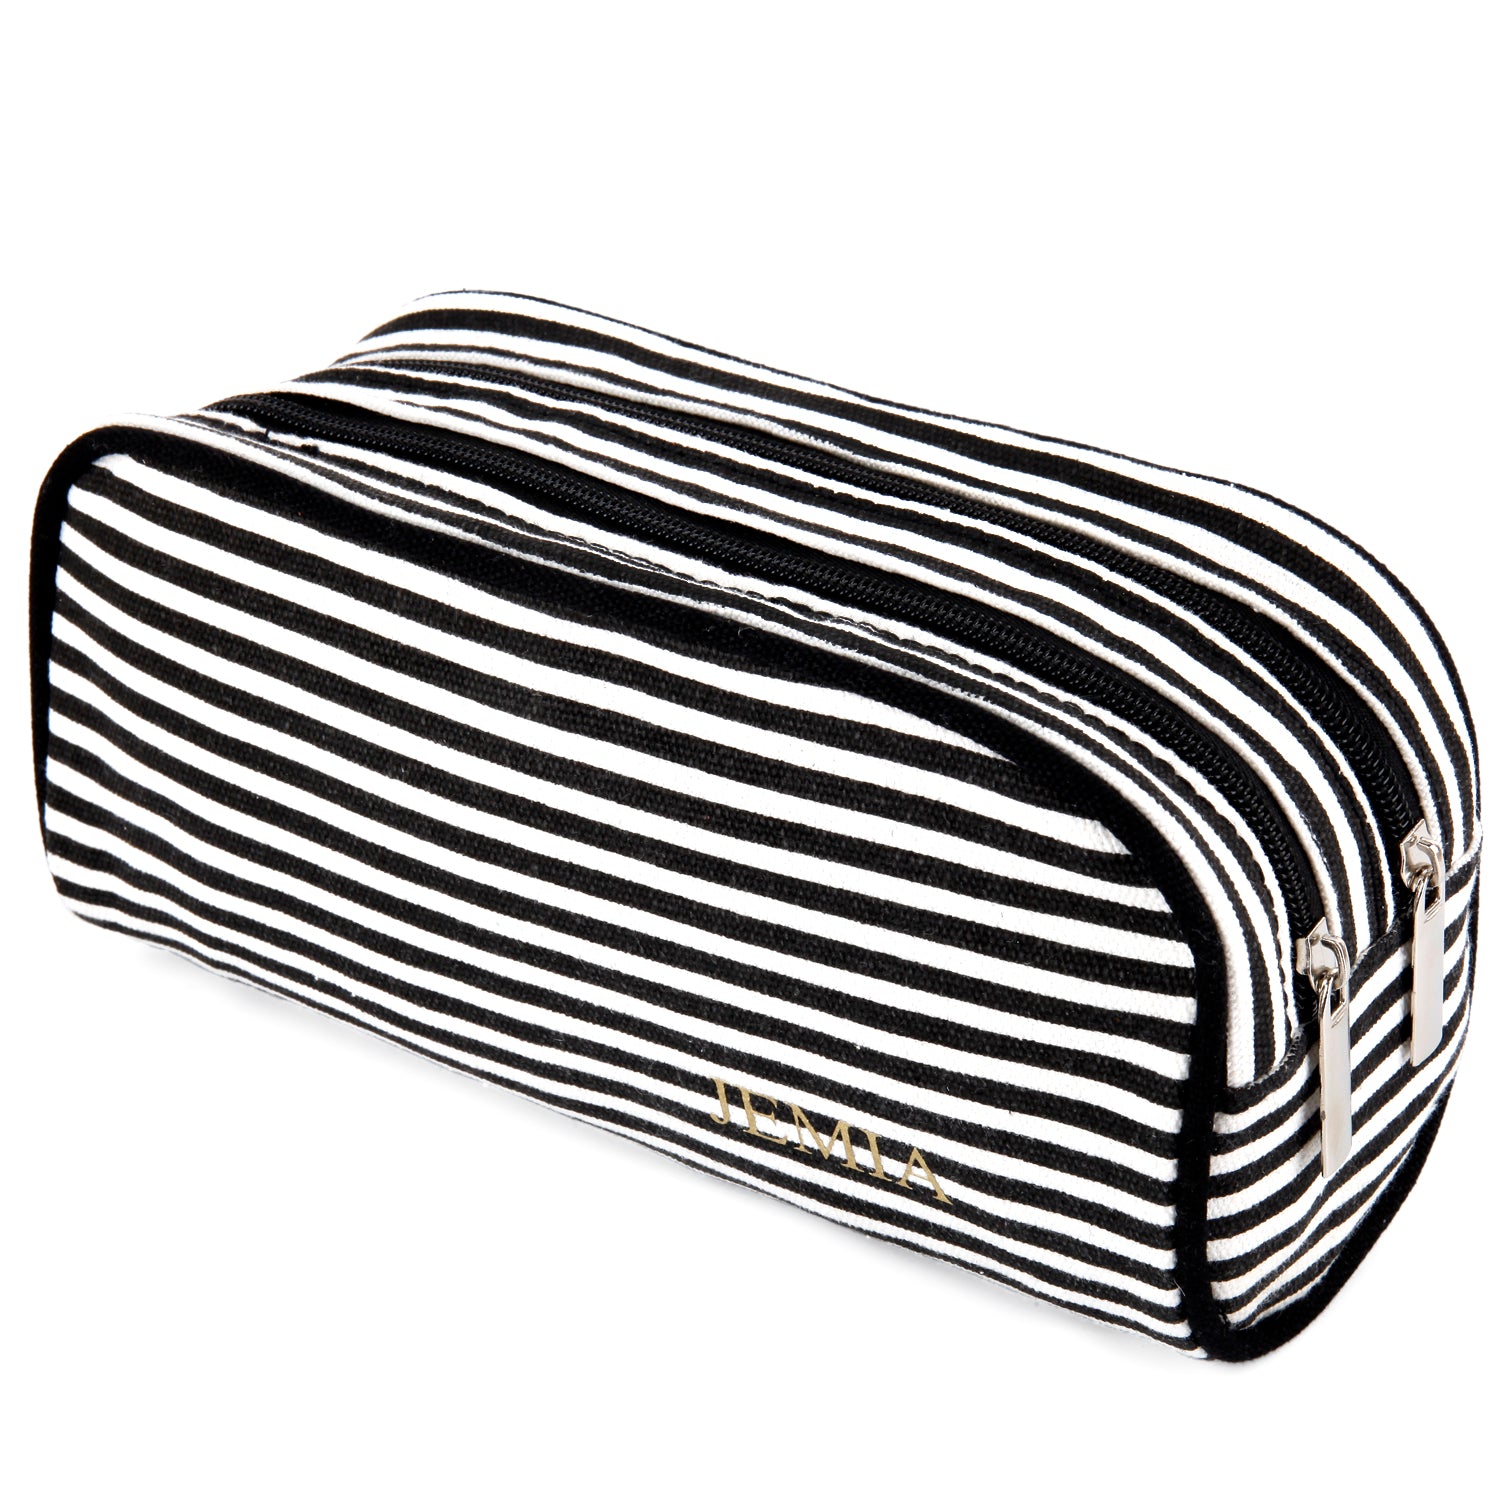 BLACK & WHITE STRIPES PENCIL CASE WITH 2 INDEPENDENT COMPARTMENTS